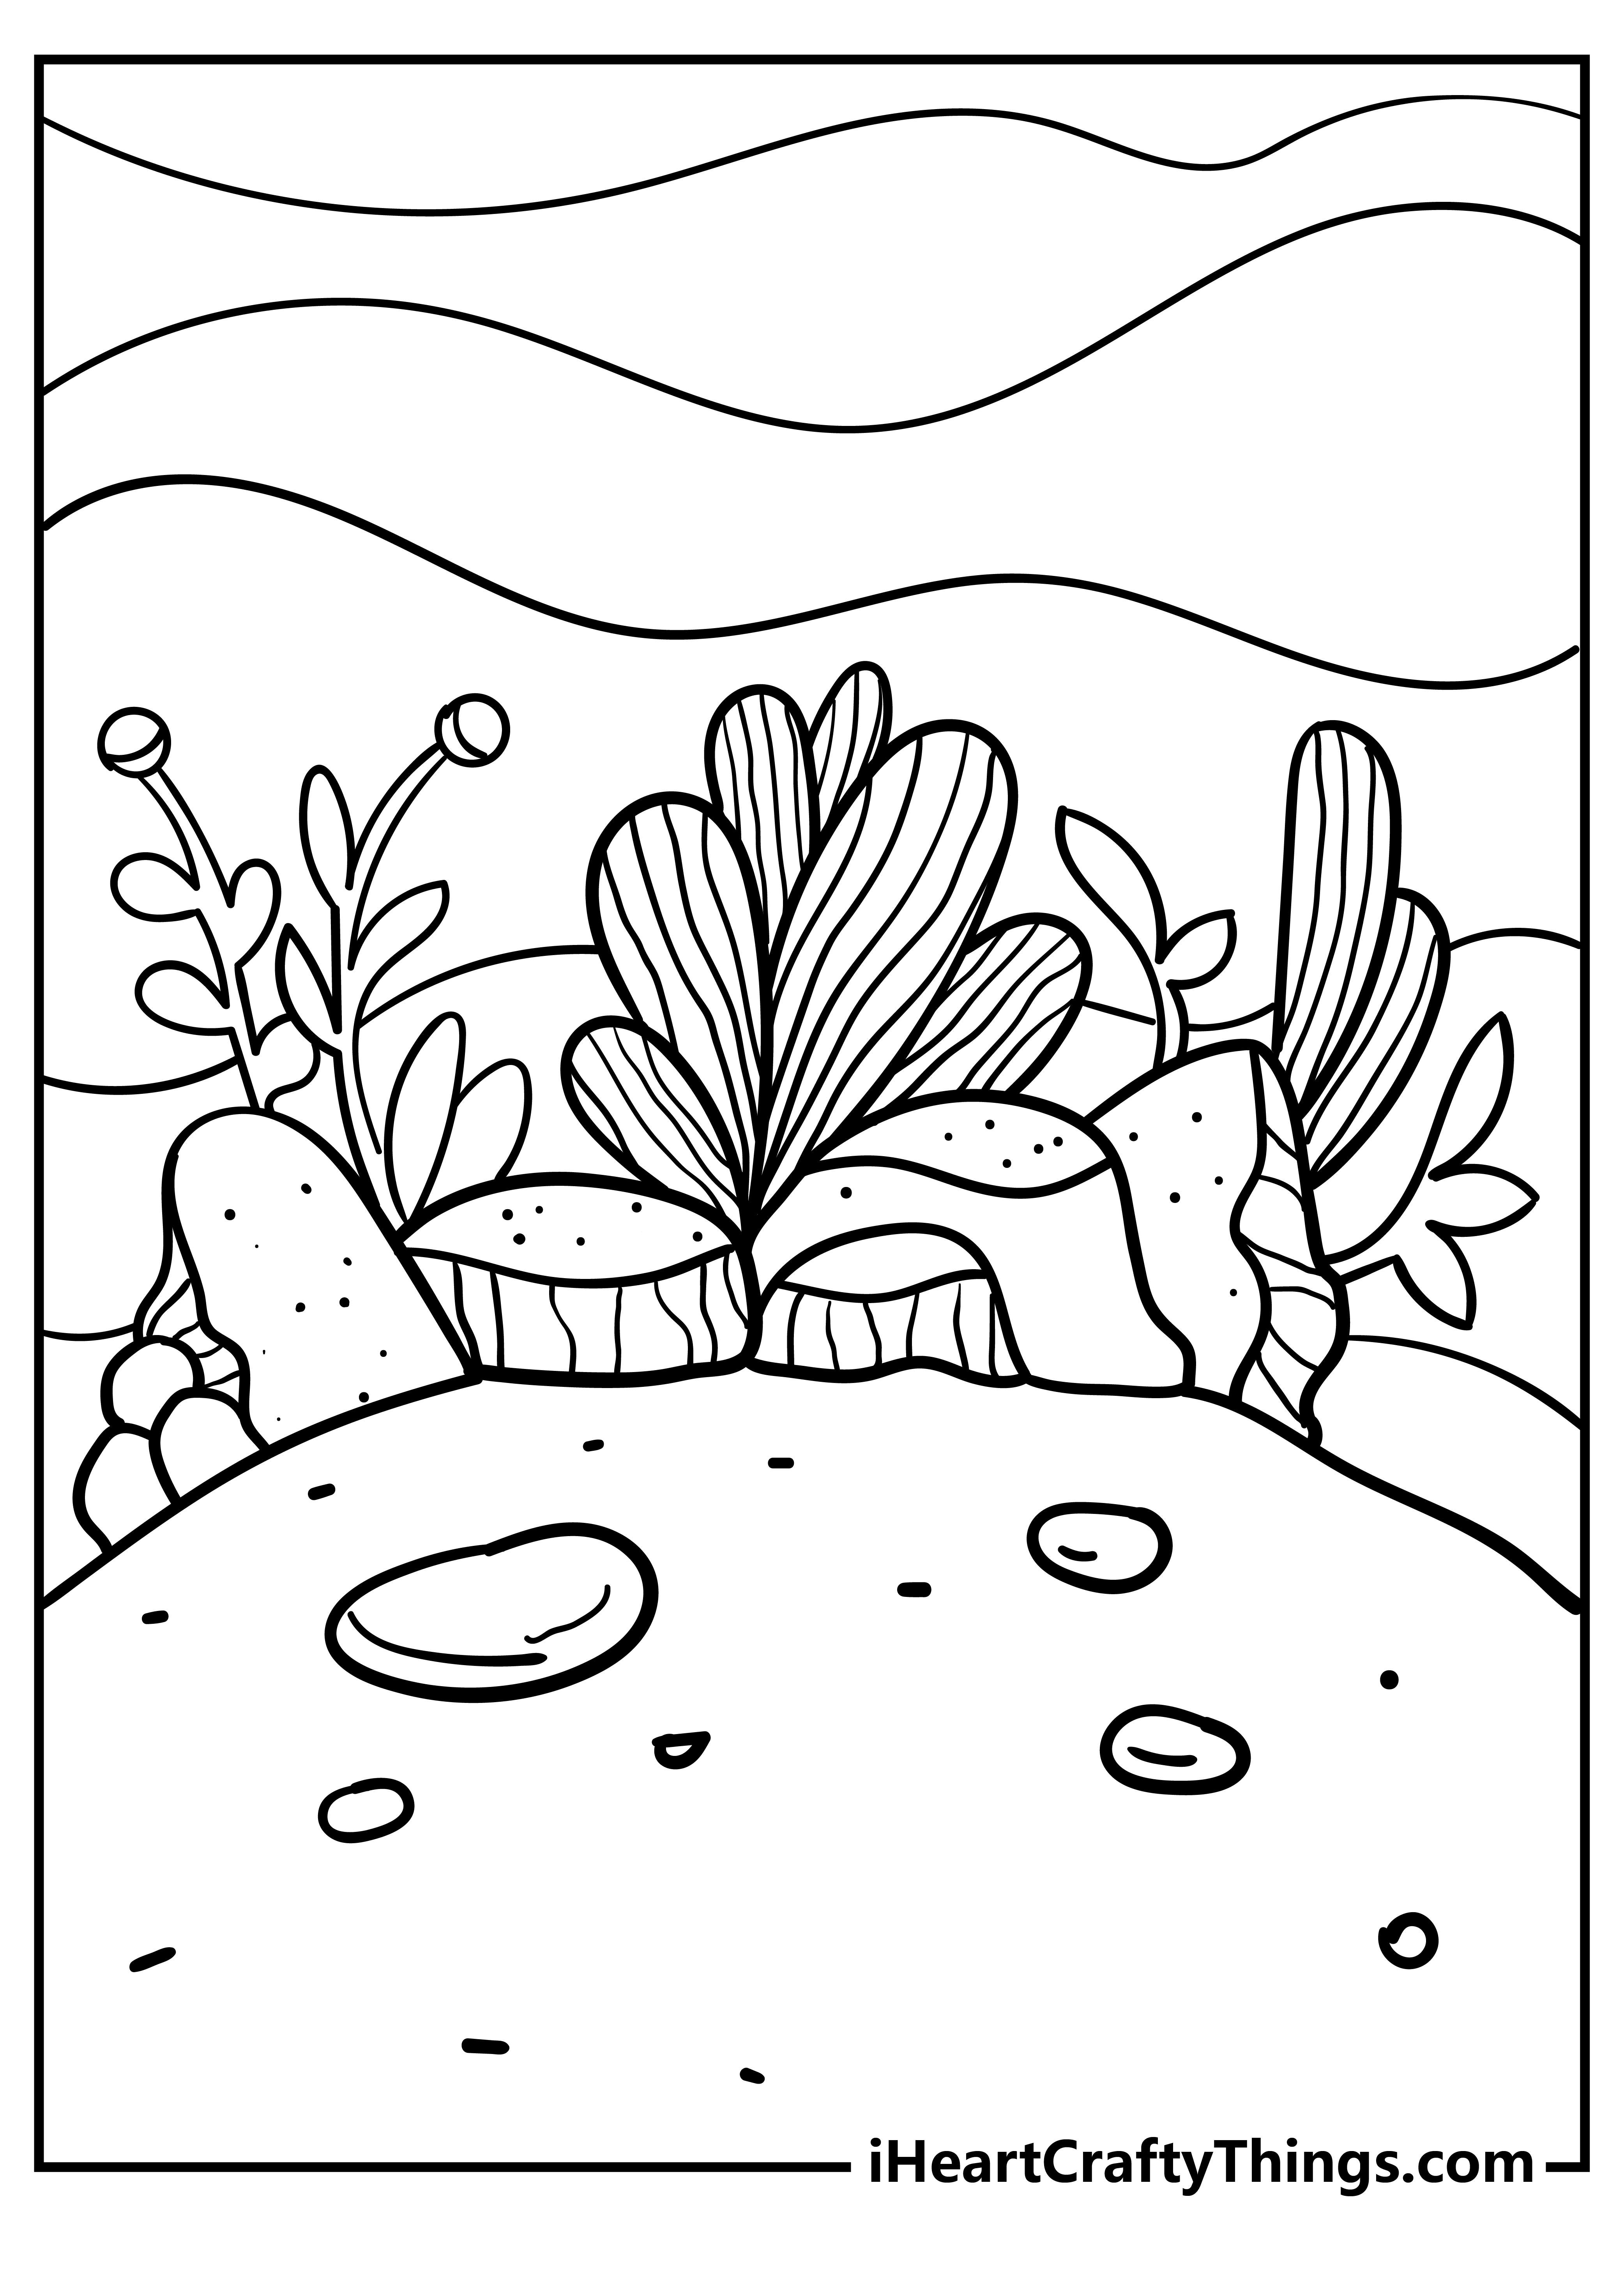 Nature coloring pages free printables